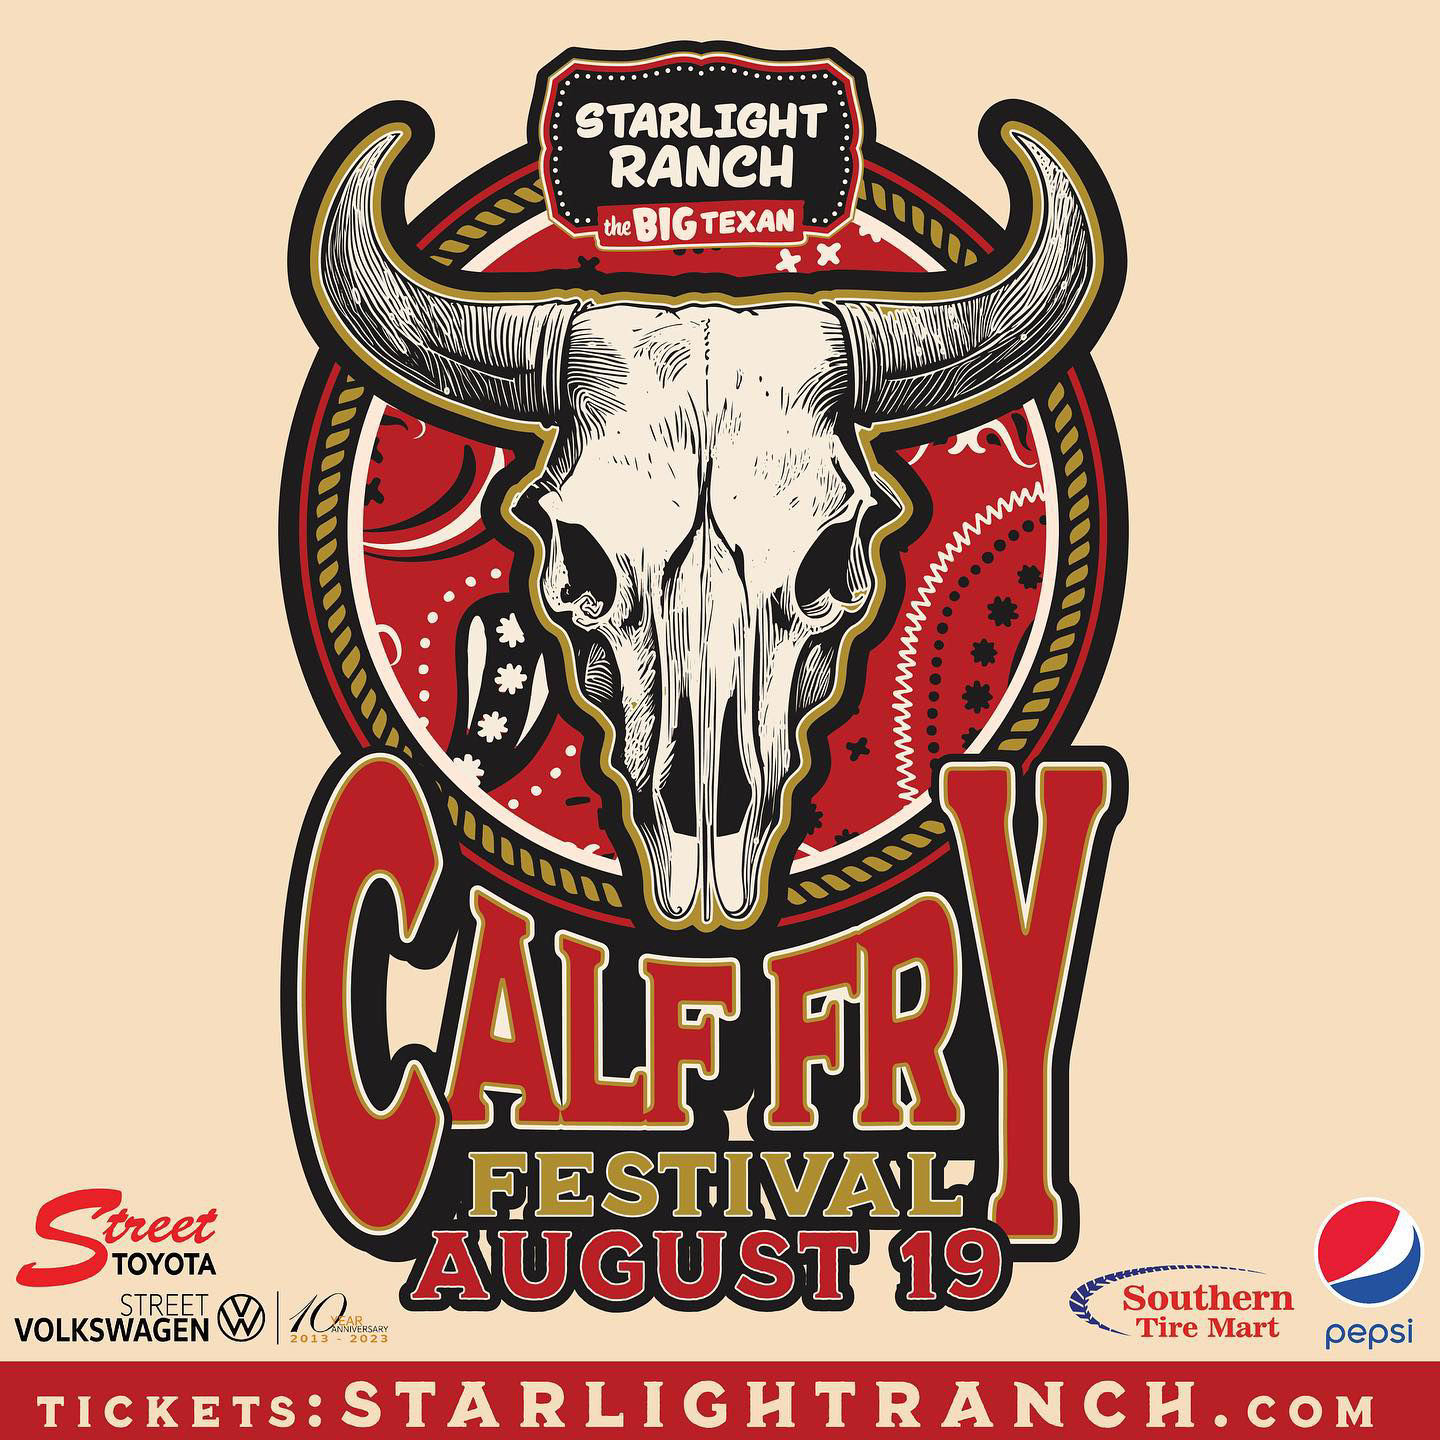 Starlight Ranch Event Center hosting Calf Fry Festival this weekend